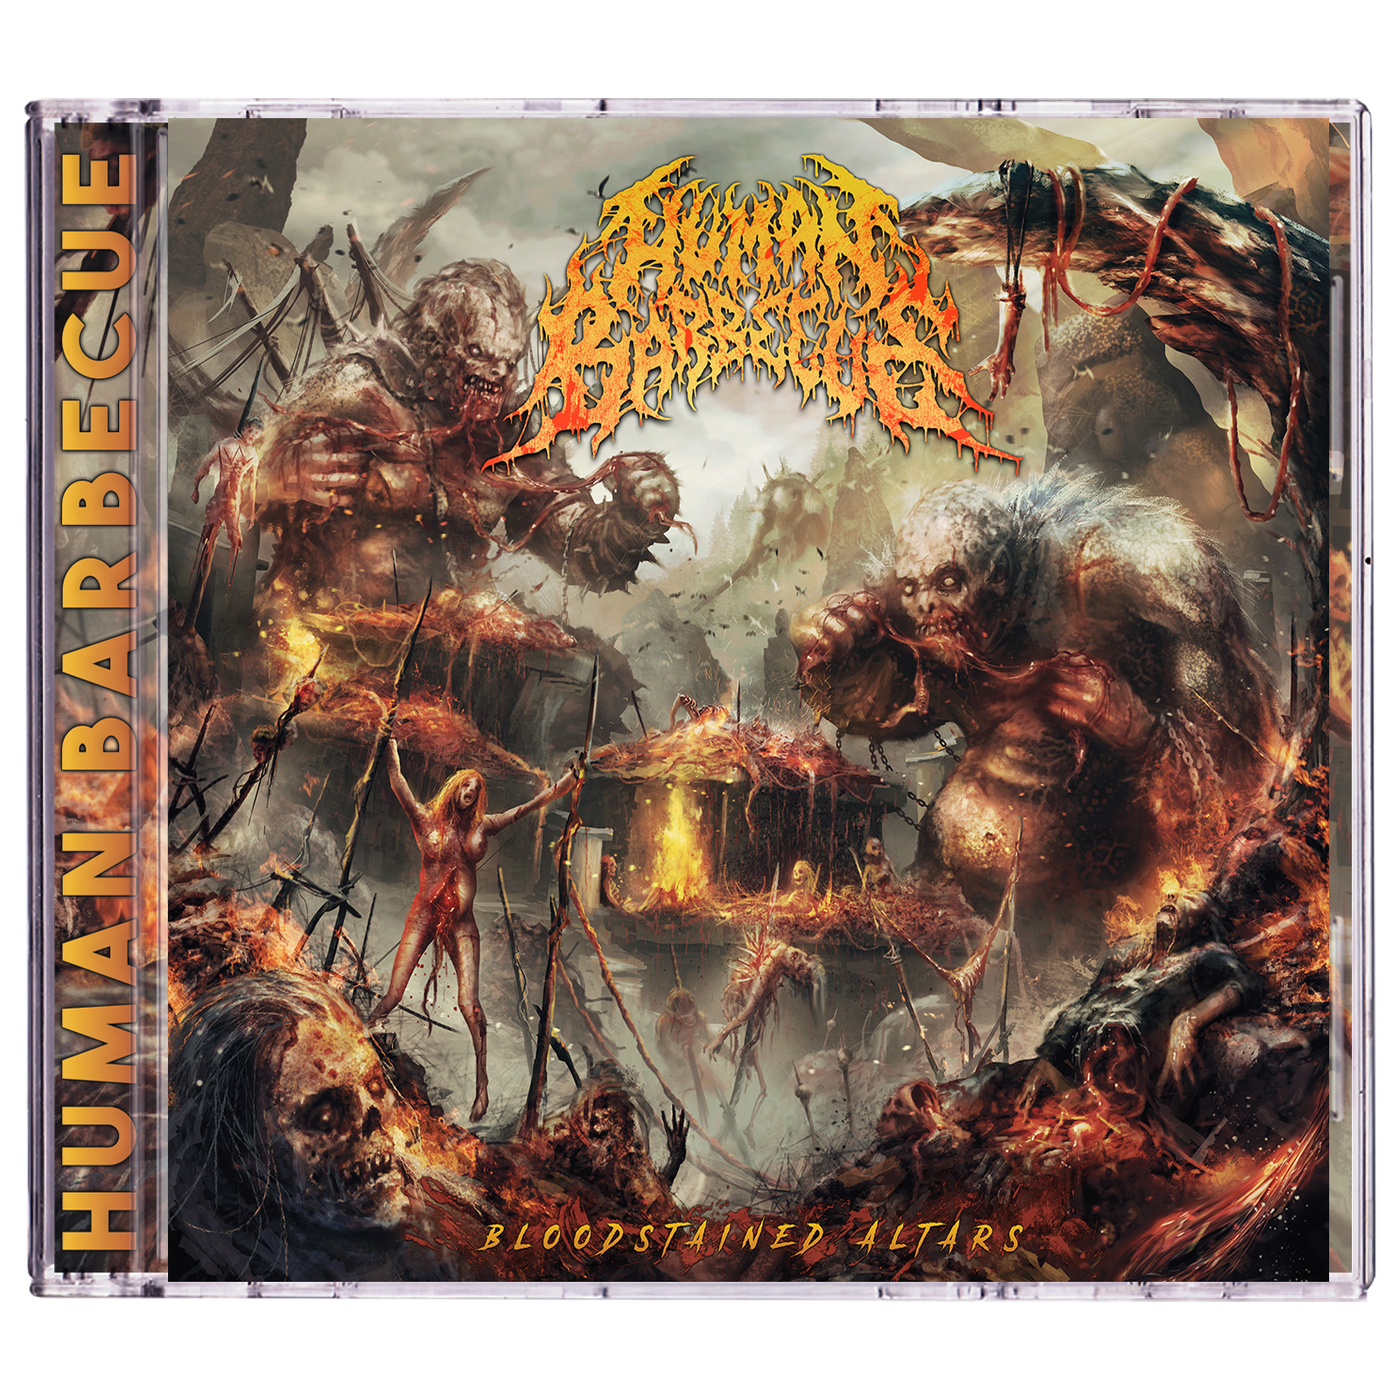 Human Barbecue ‘Bloodstained Altars’ CD